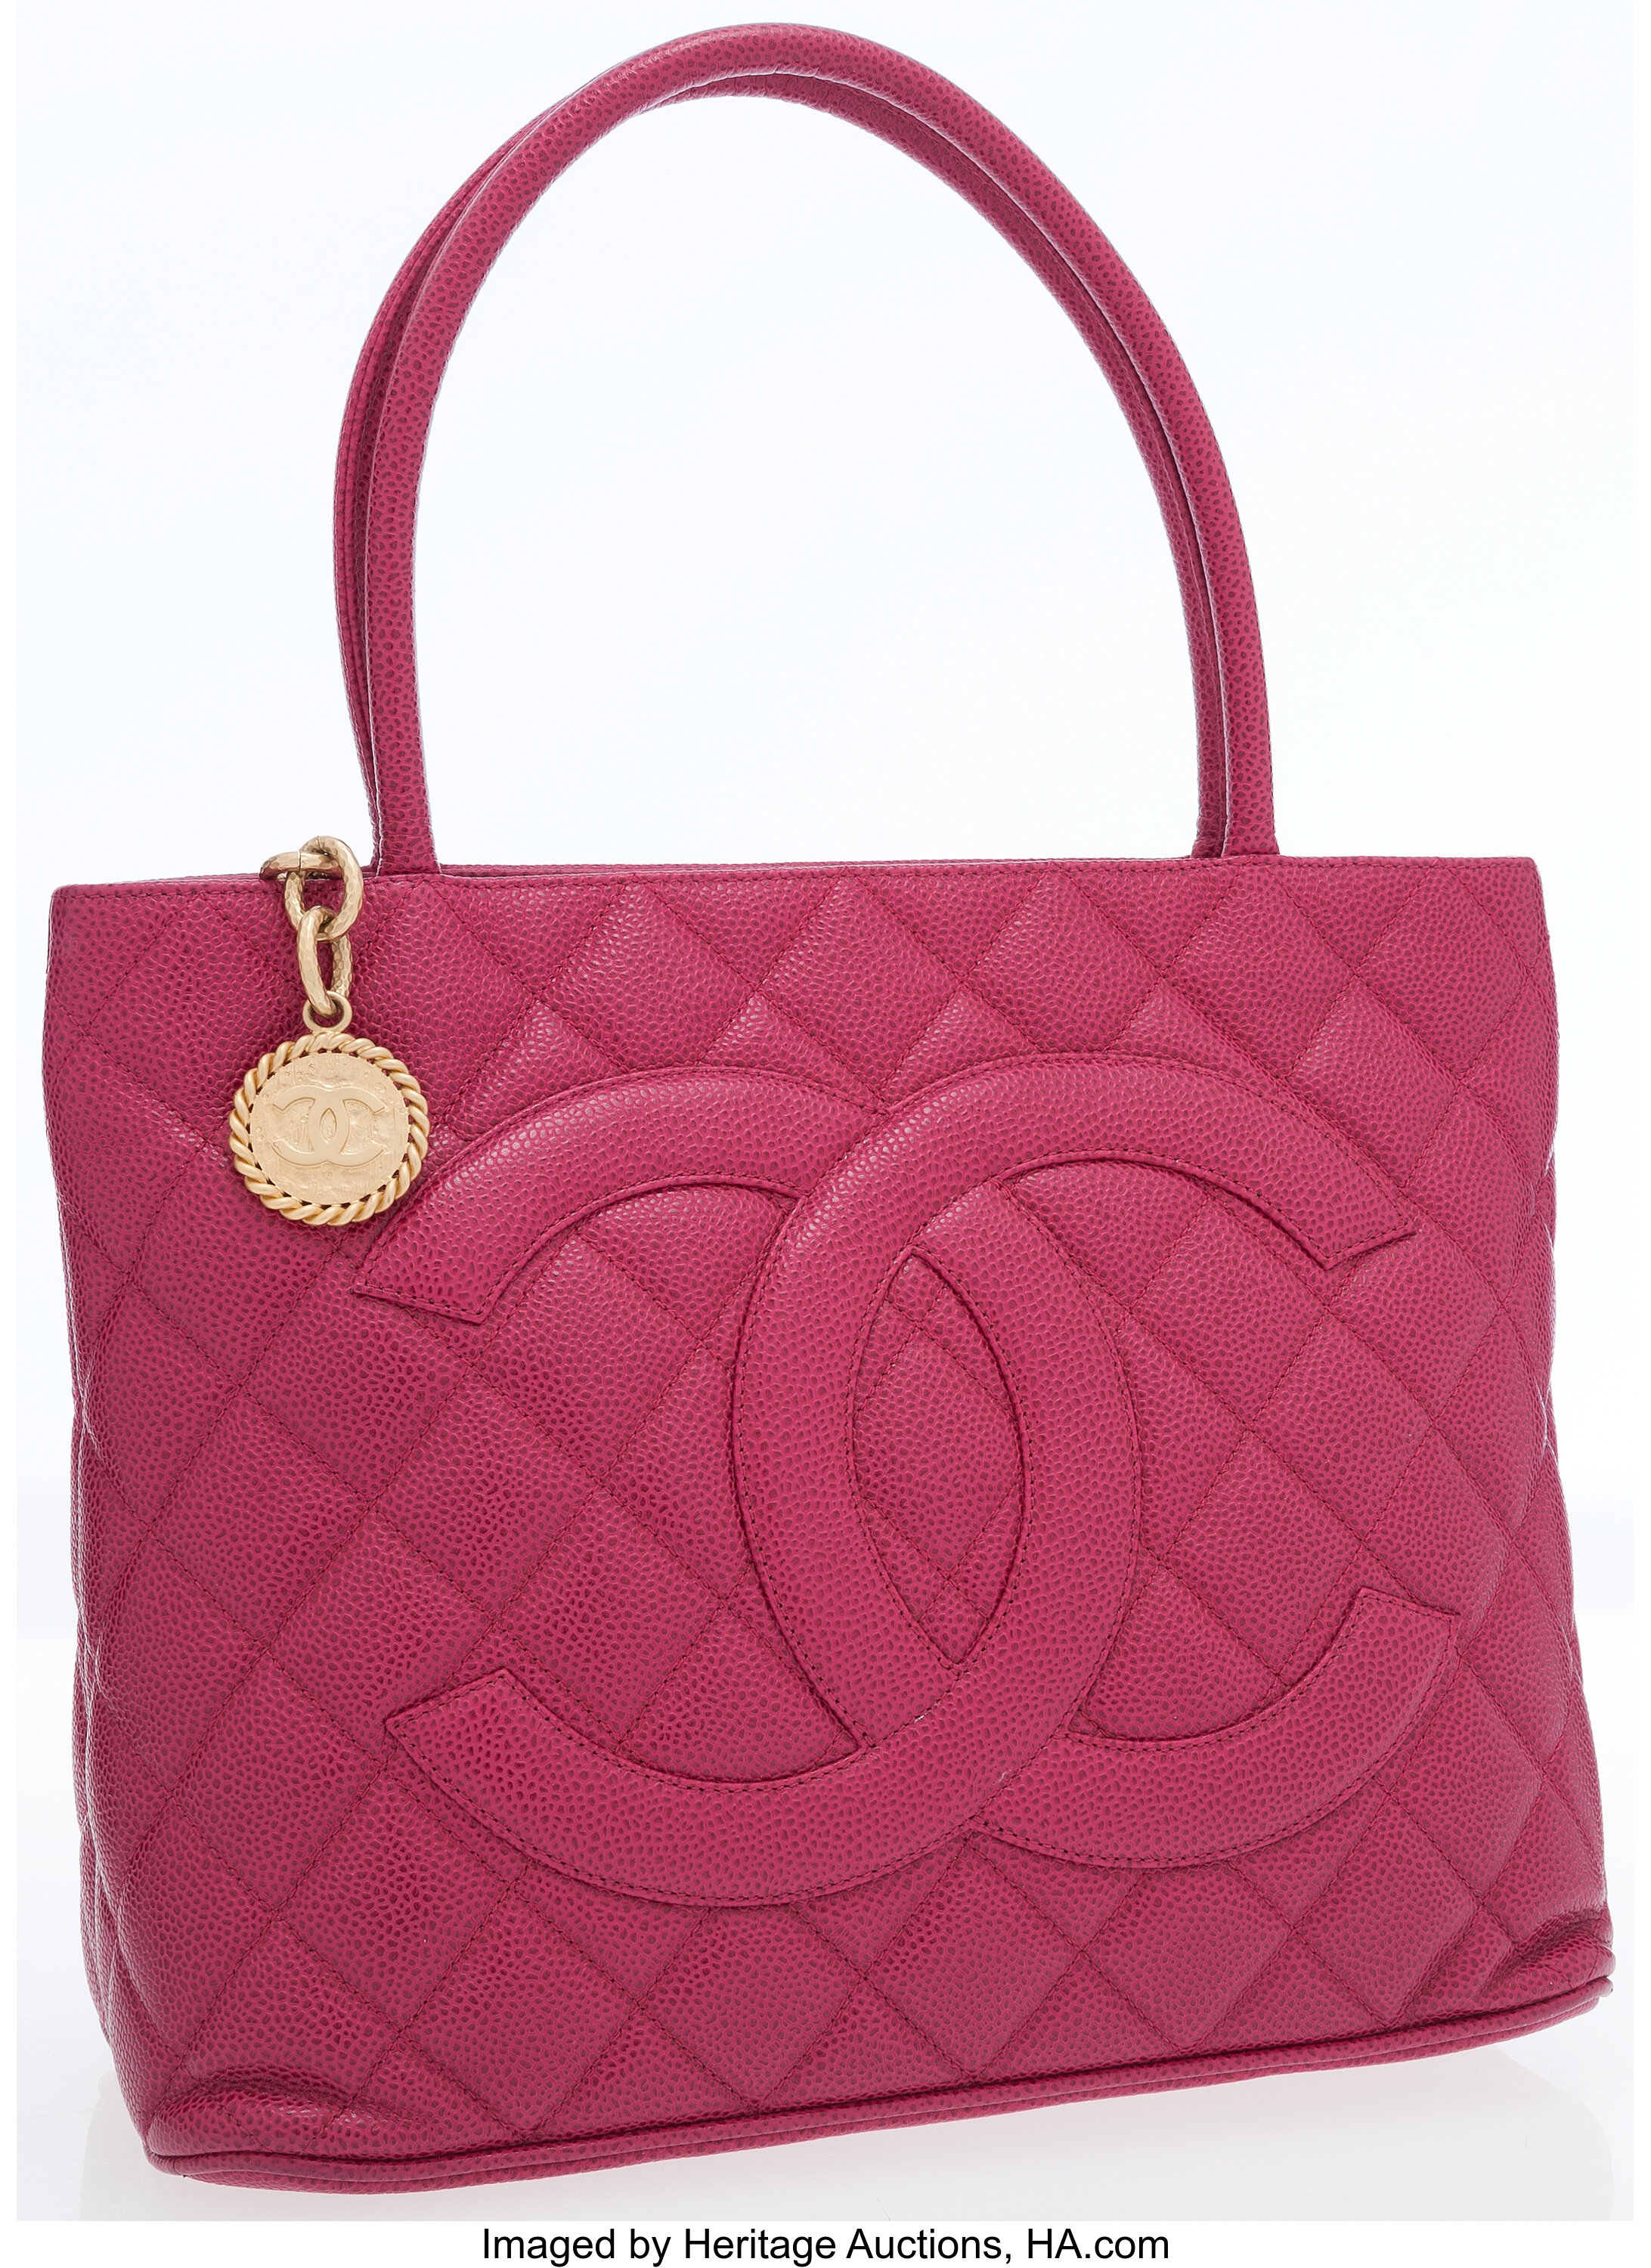 Sold at Auction: Chanel Caviar Quilted Medallion Tote Bag